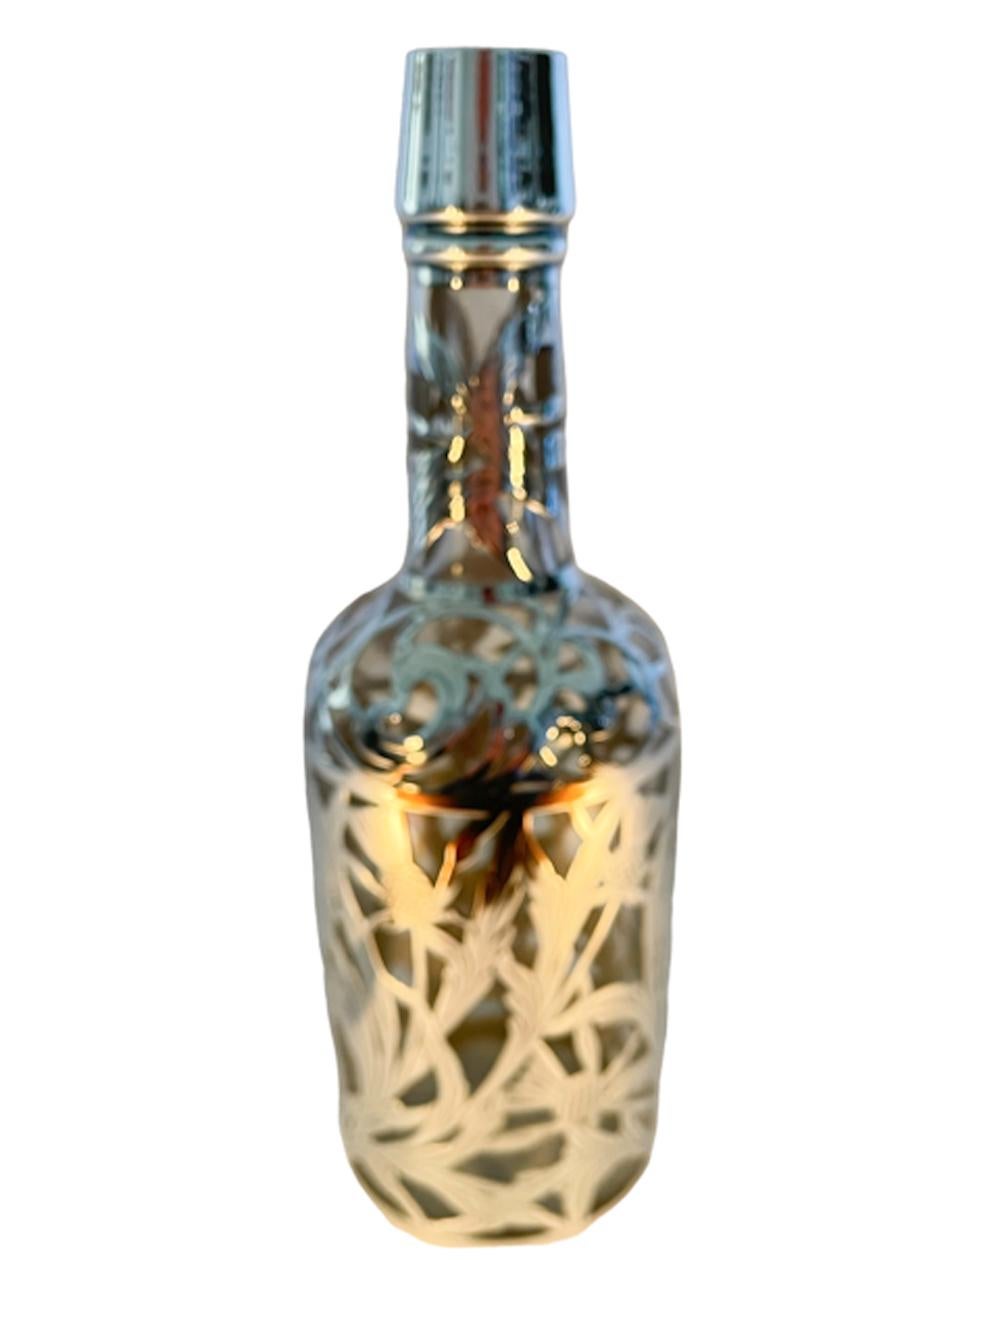 Art Nouveau Silver Overlay Decanter or Back Bar Bottle with Thistle Design  For Sale 2